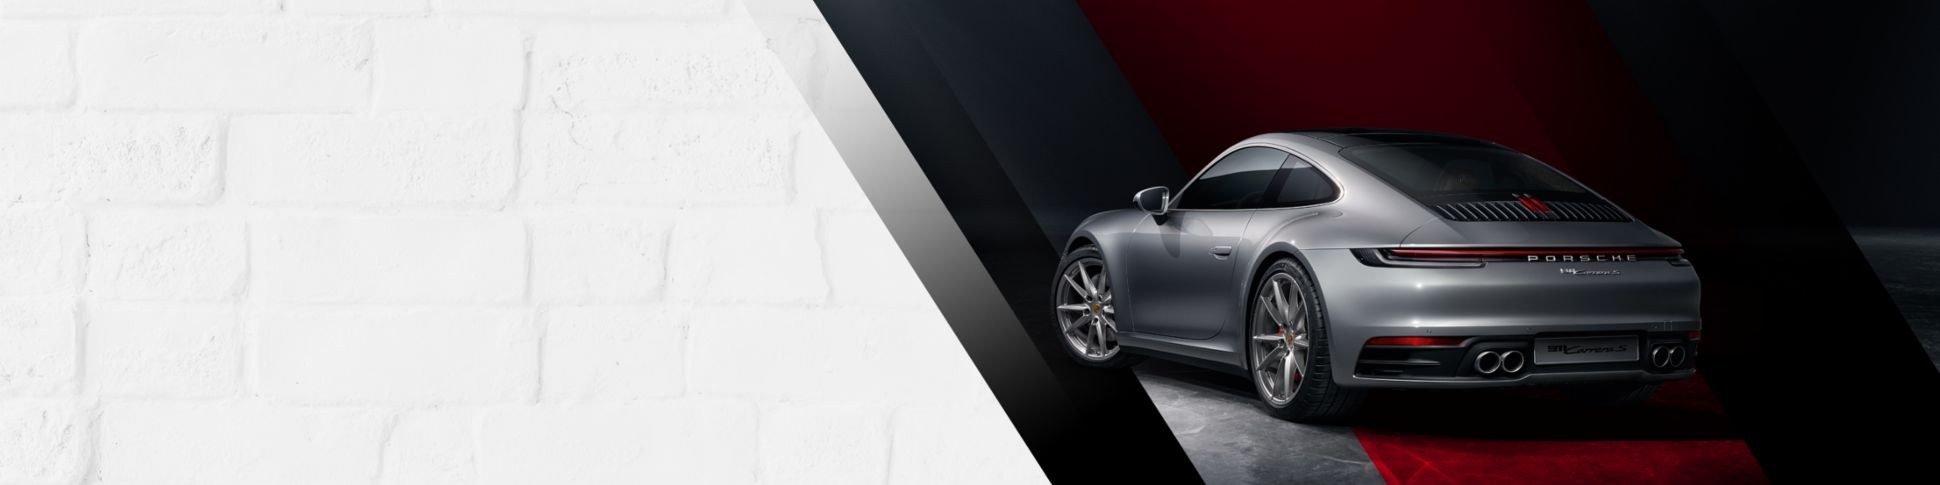 The new Porsche 911 S/T: purist special-edition model marks 60th  anniversary of the 911 - Porsche Newsroom